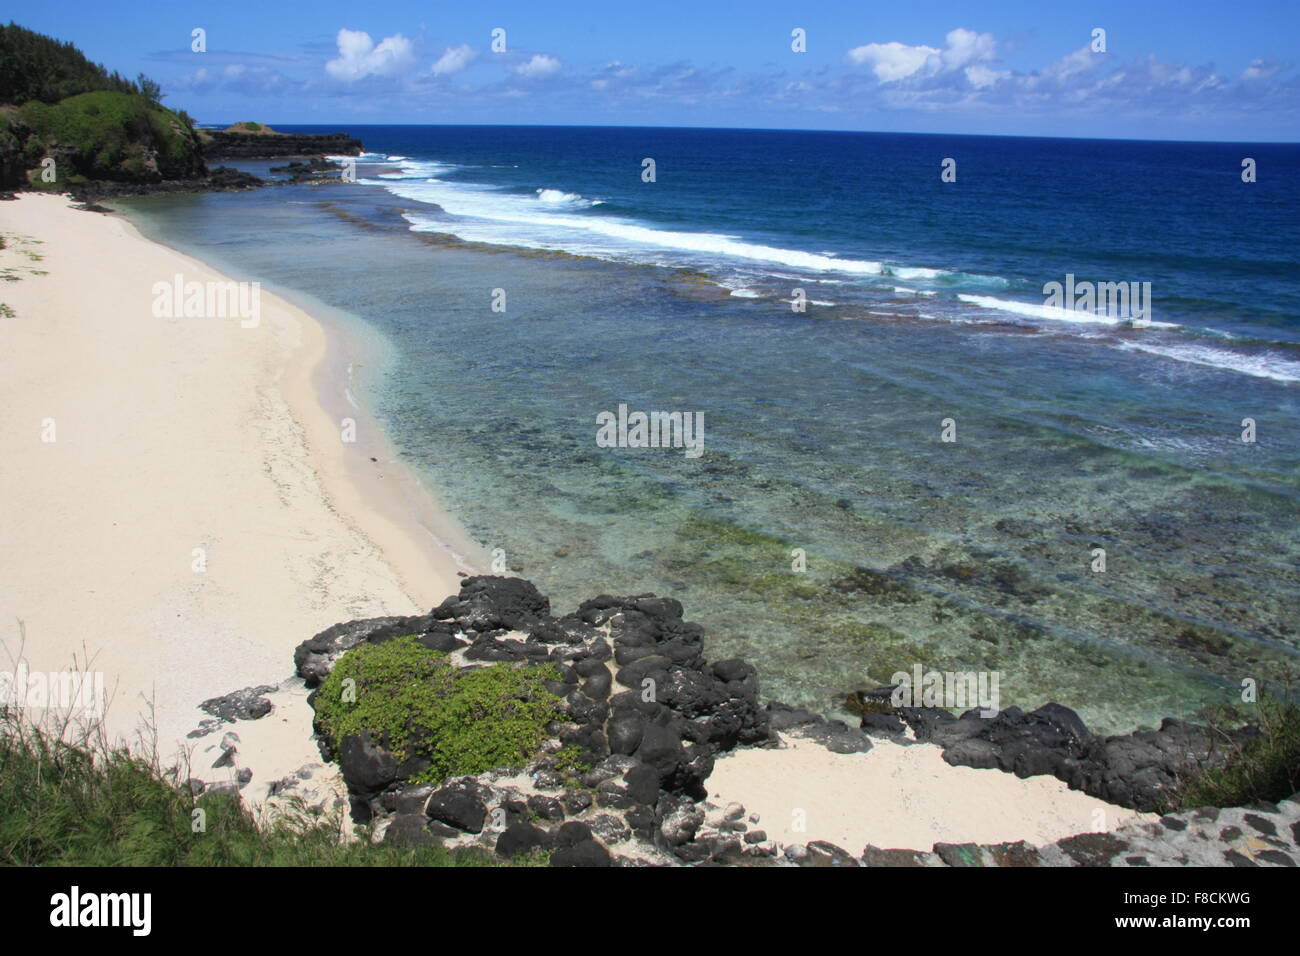 View to the Gris-Gris sandy beach. Africa, Mauritius, Indian Ocean Stock Photo